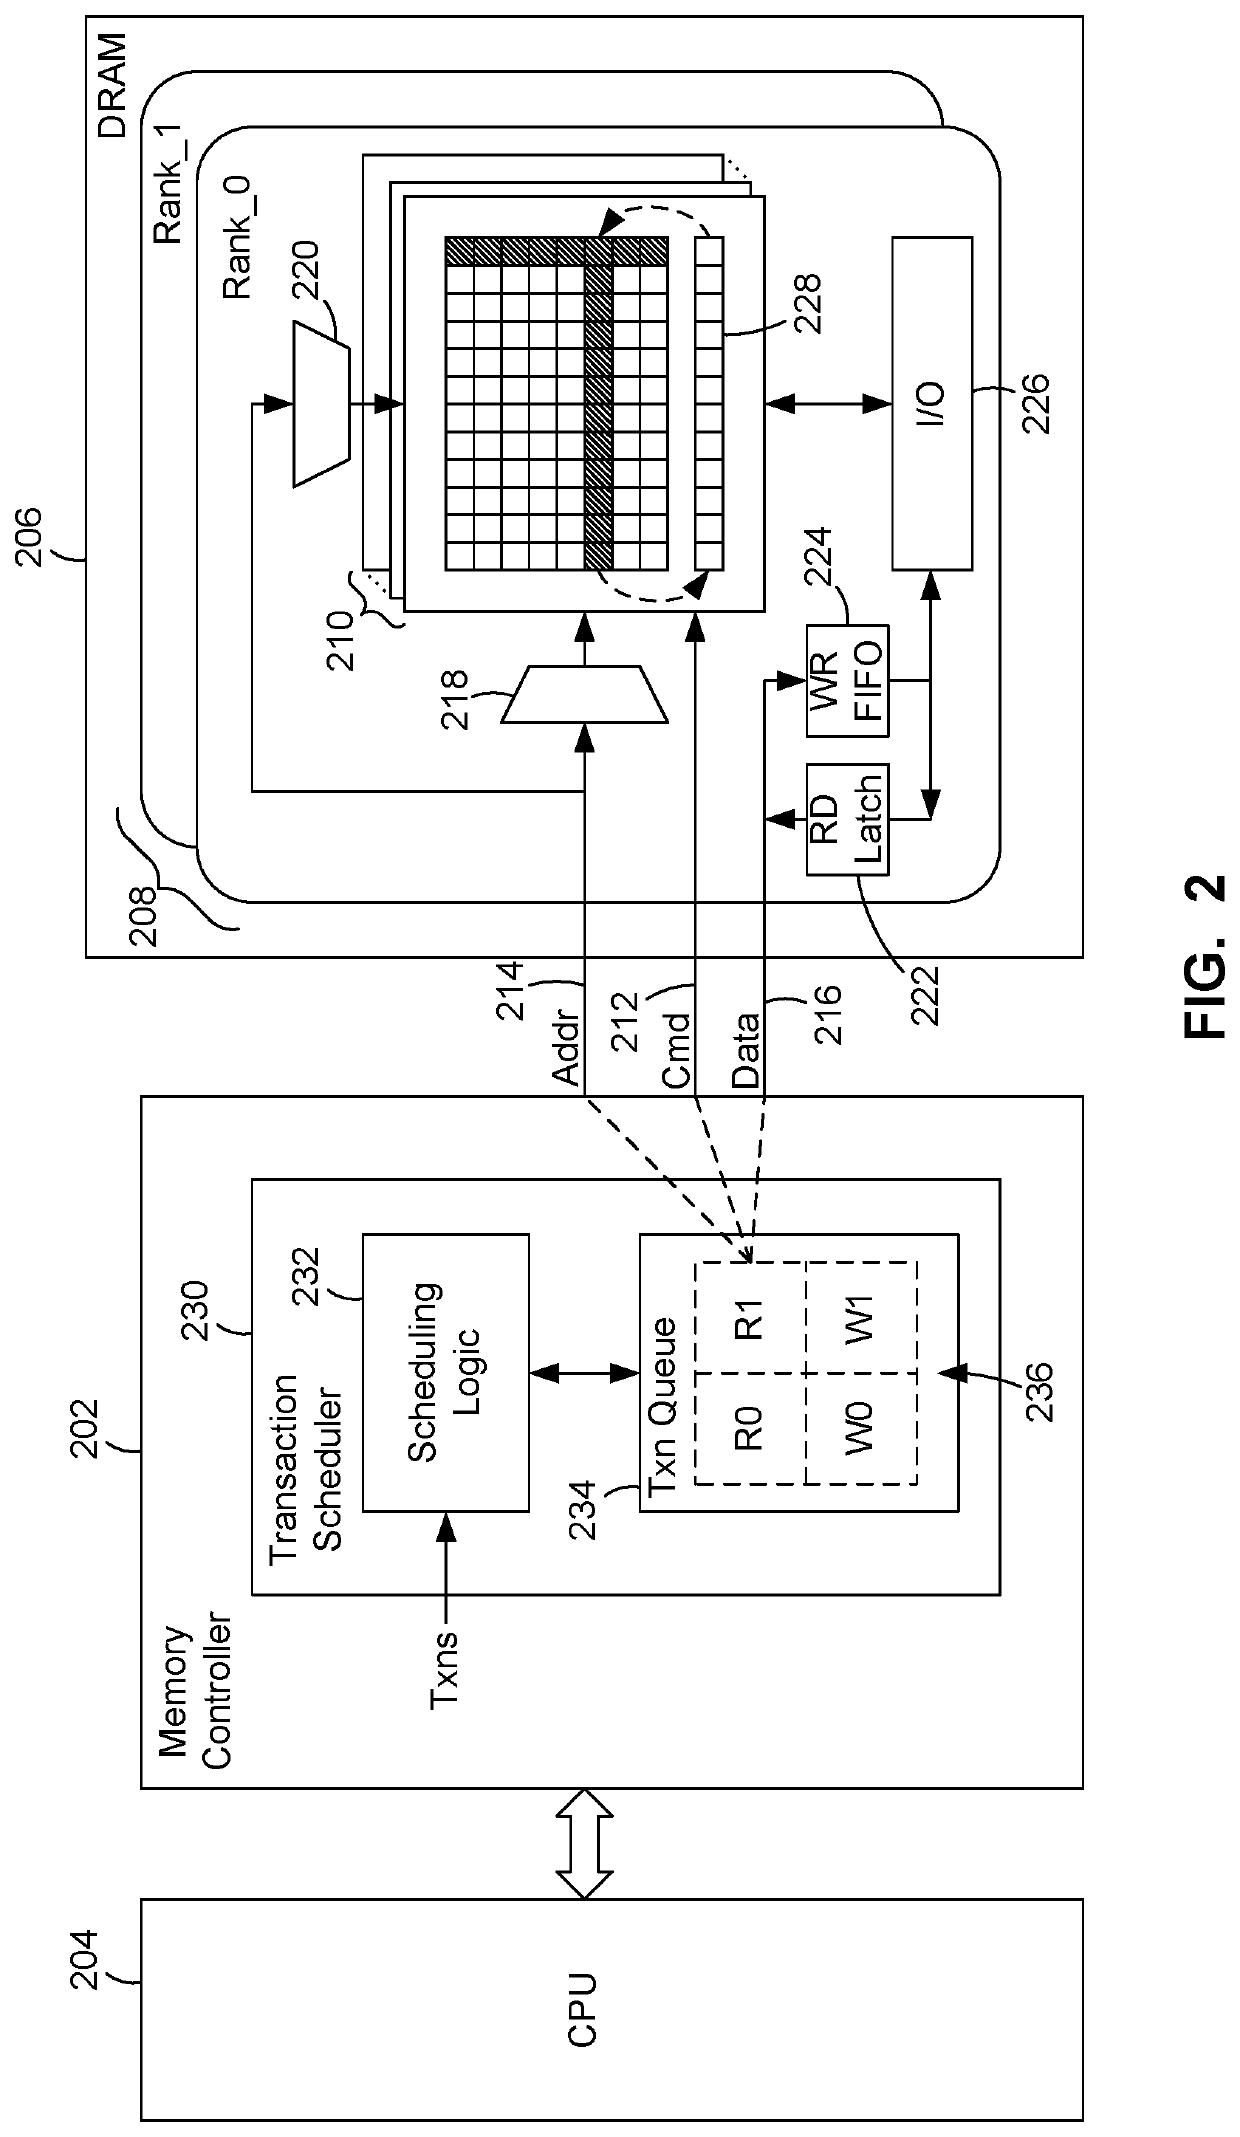 Adaptive memory transaction scheduling